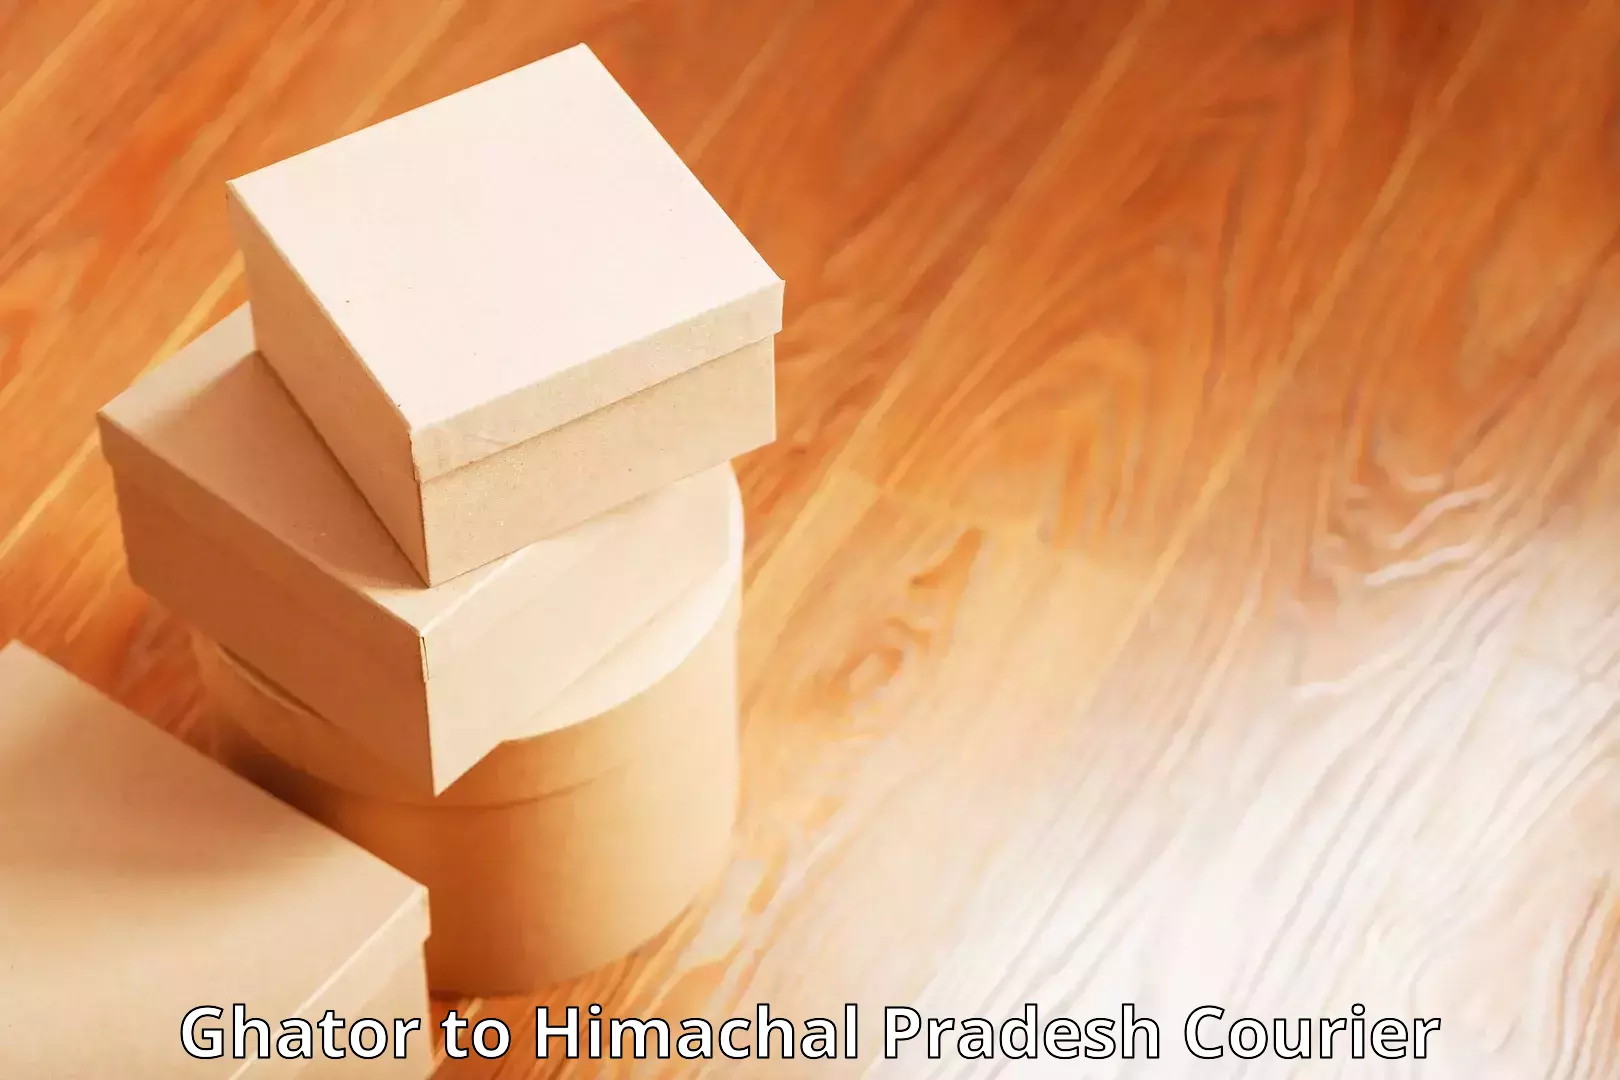 Full-service courier options Ghator to Himachal Pradesh